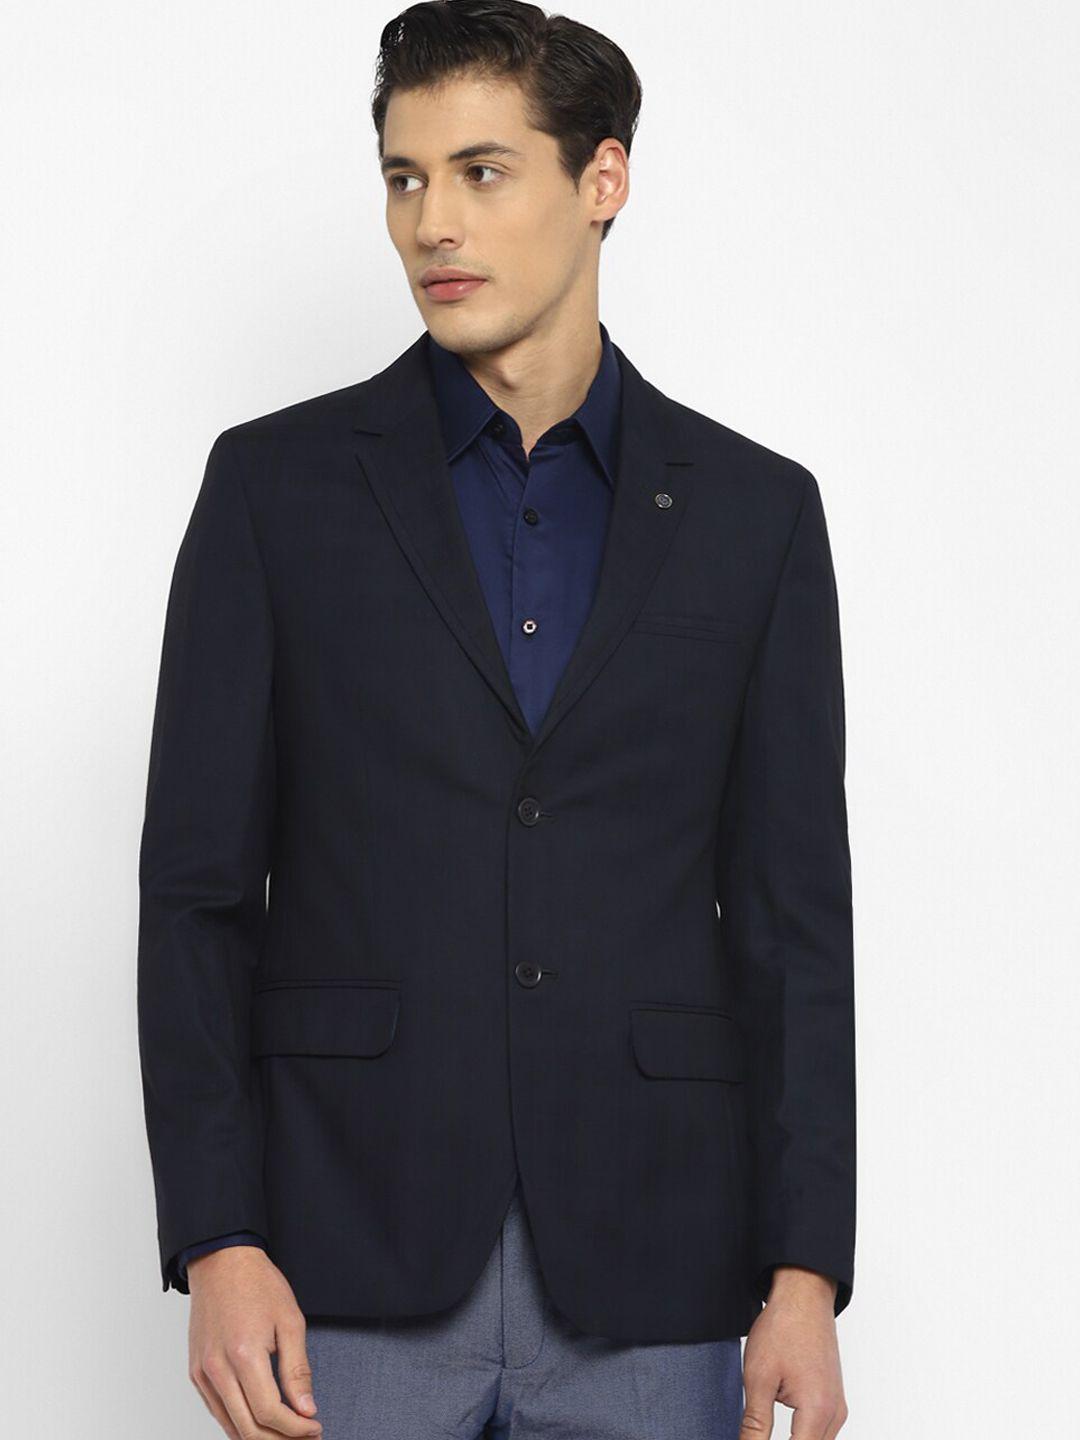 top-brass-single-breasted-notched-lapel-formal-blazer